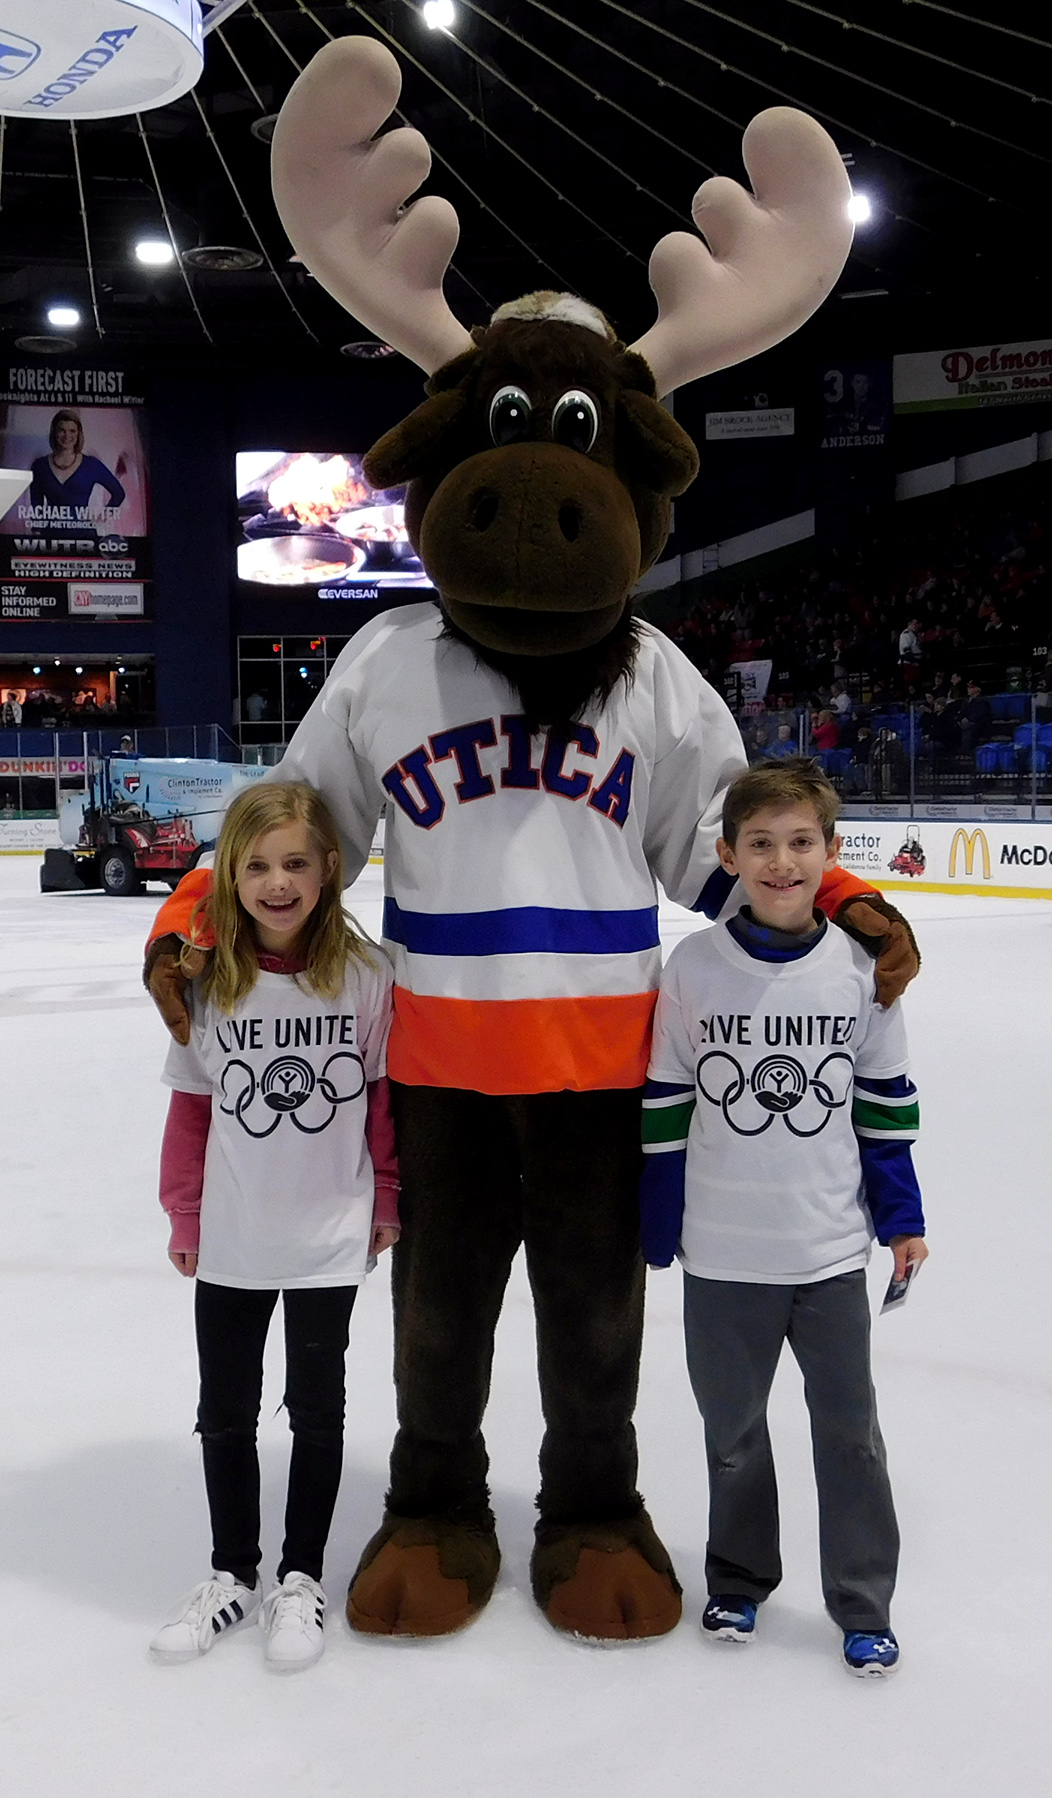 Sixth Annual Live United Hockey Night United Way of the Mohawk Valley